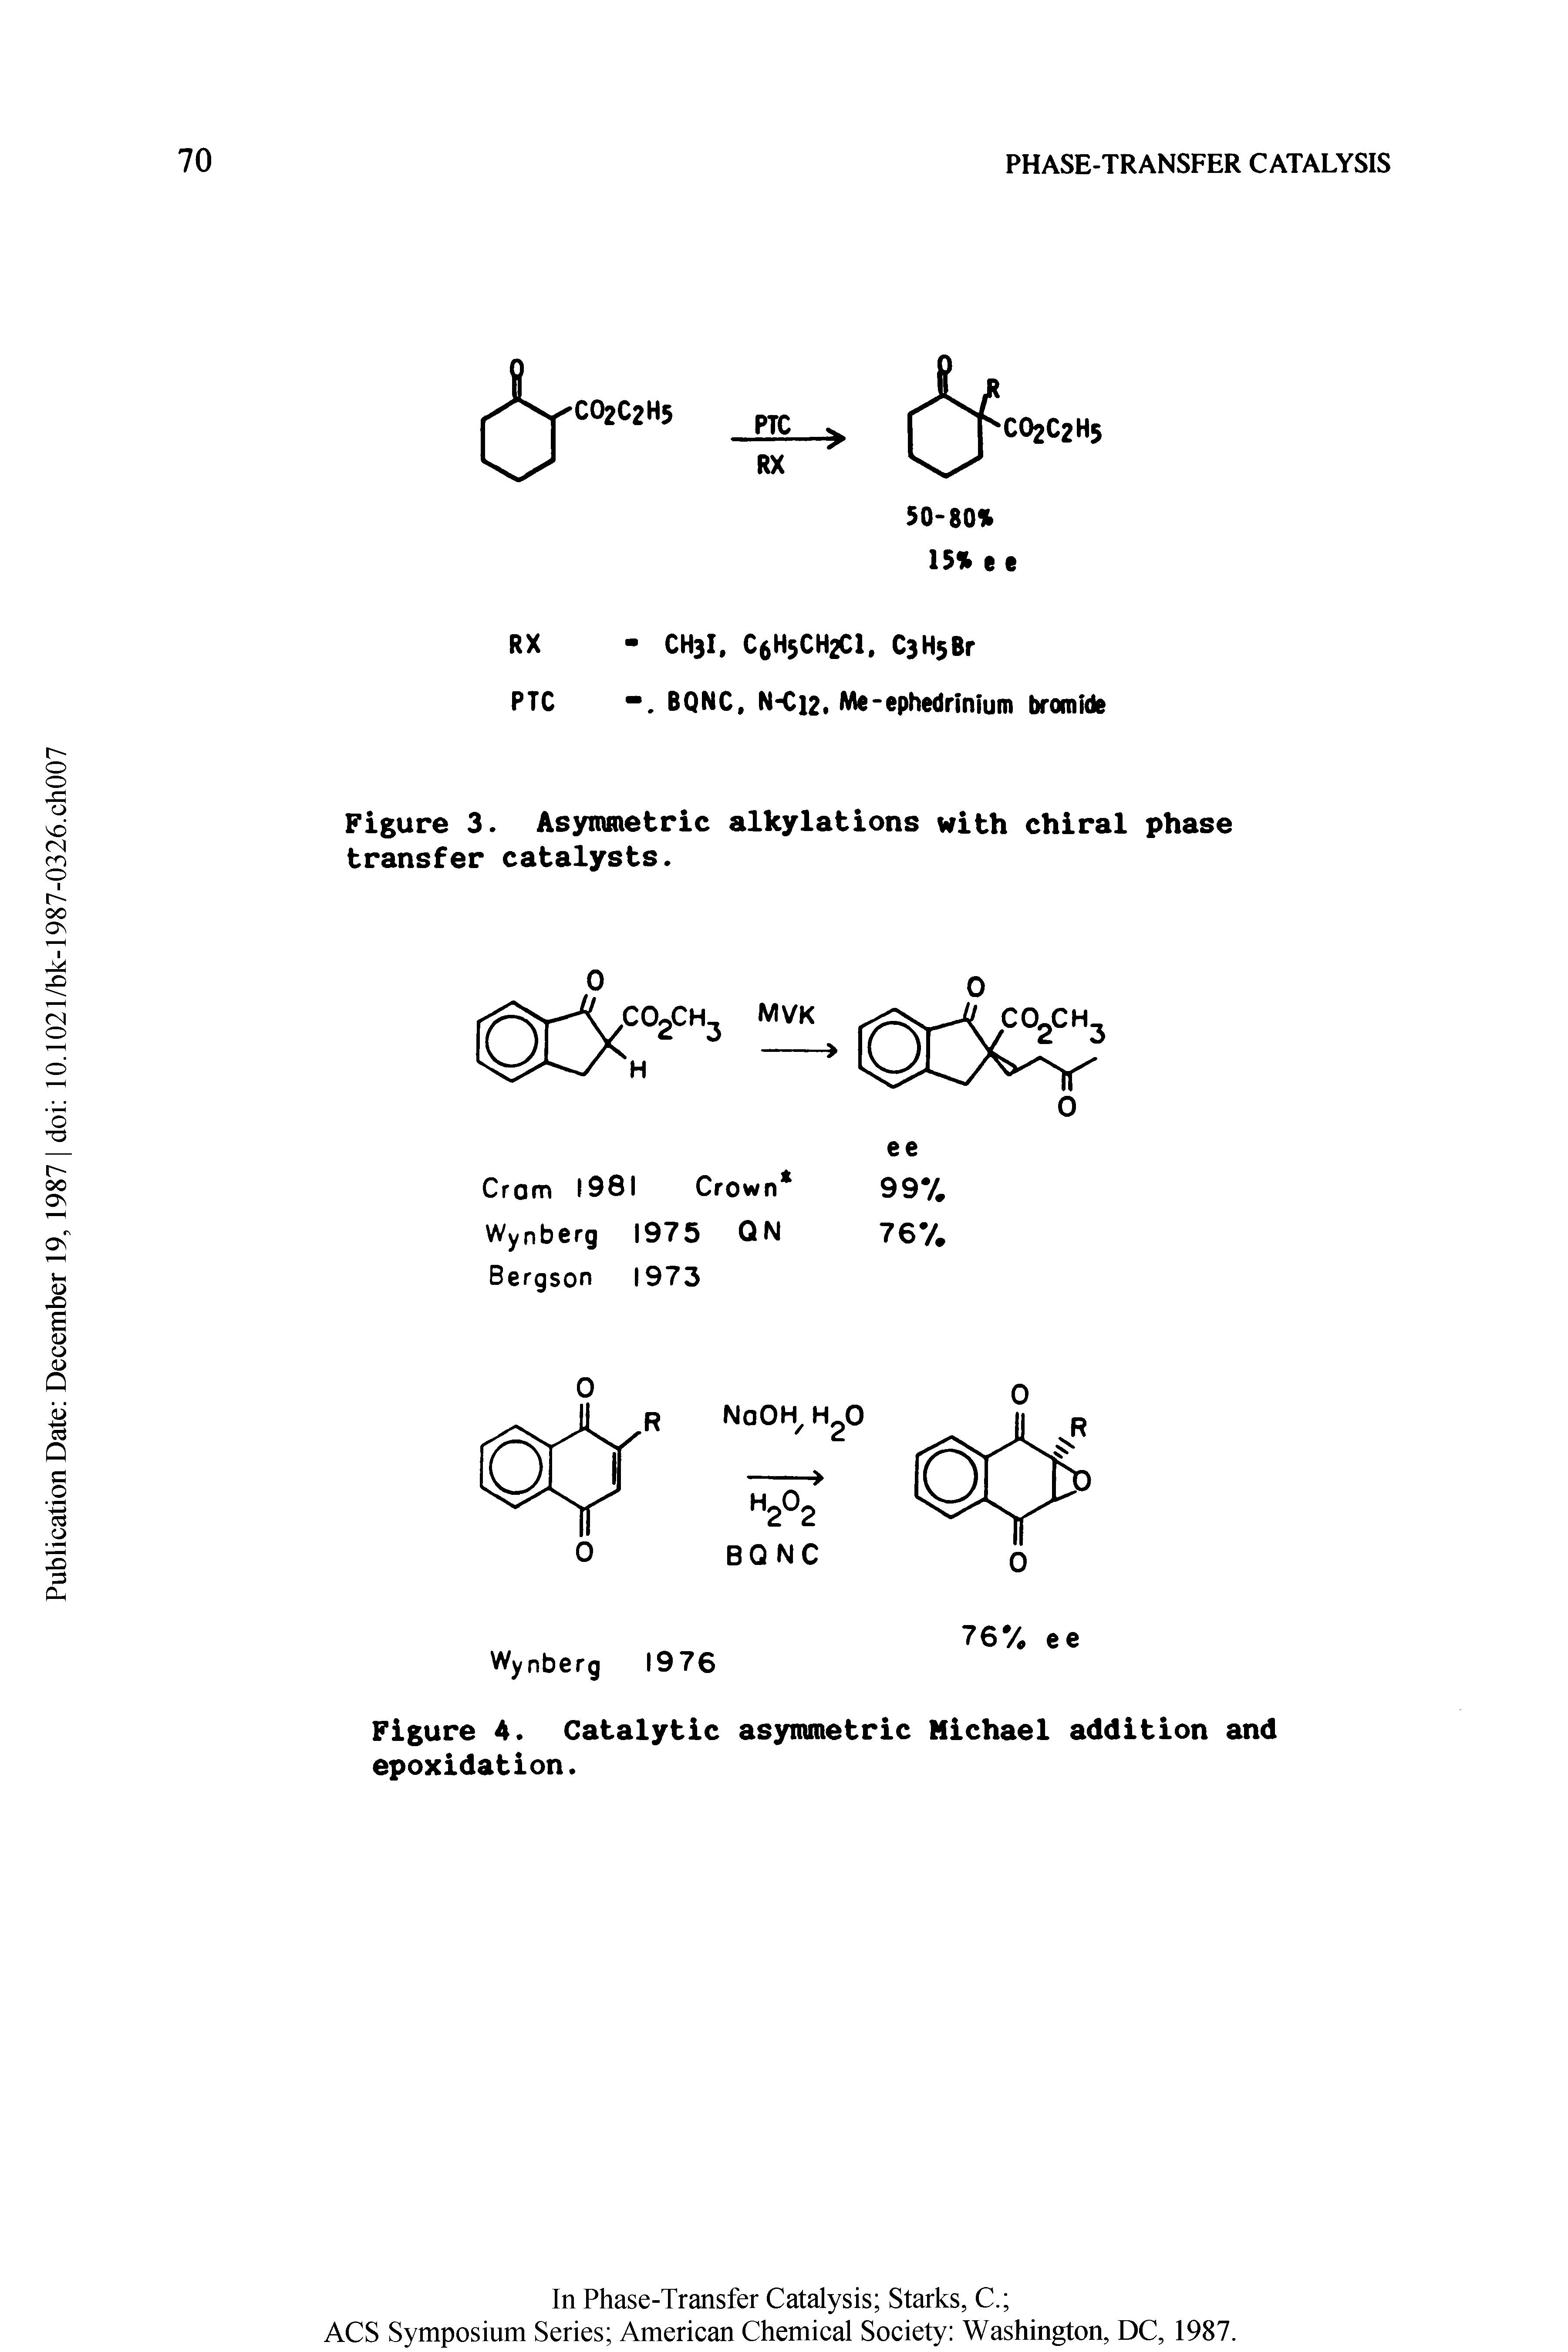 Figure 3. Asymmetric alkylations with chiral phase transfer catalysts.